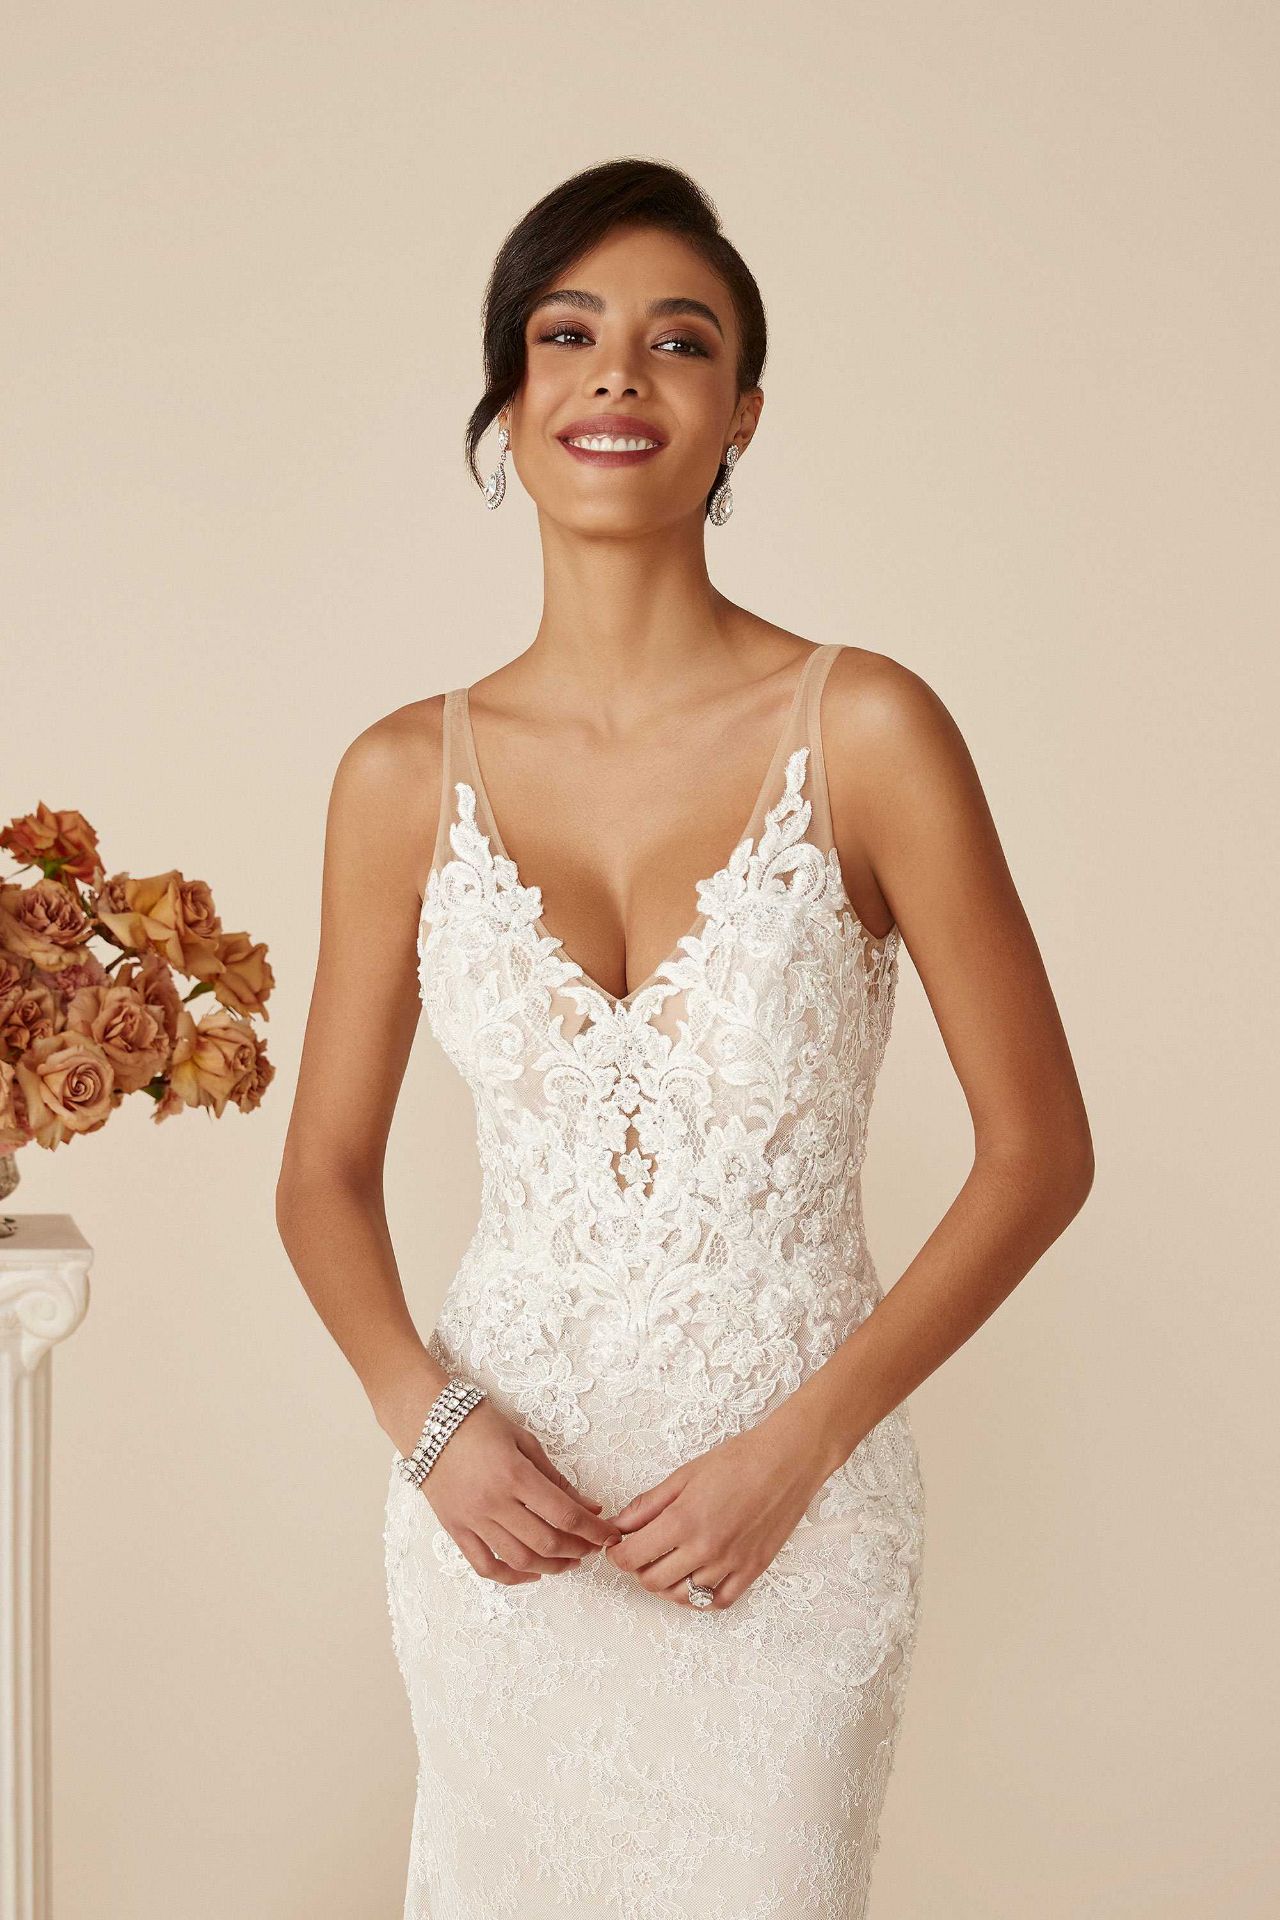 1 x Justin Alexander Allover Lace Deep V-Neck Fit and Flare Wedding Dress - UK Size 10 - RRP £1,725 - Image 3 of 11